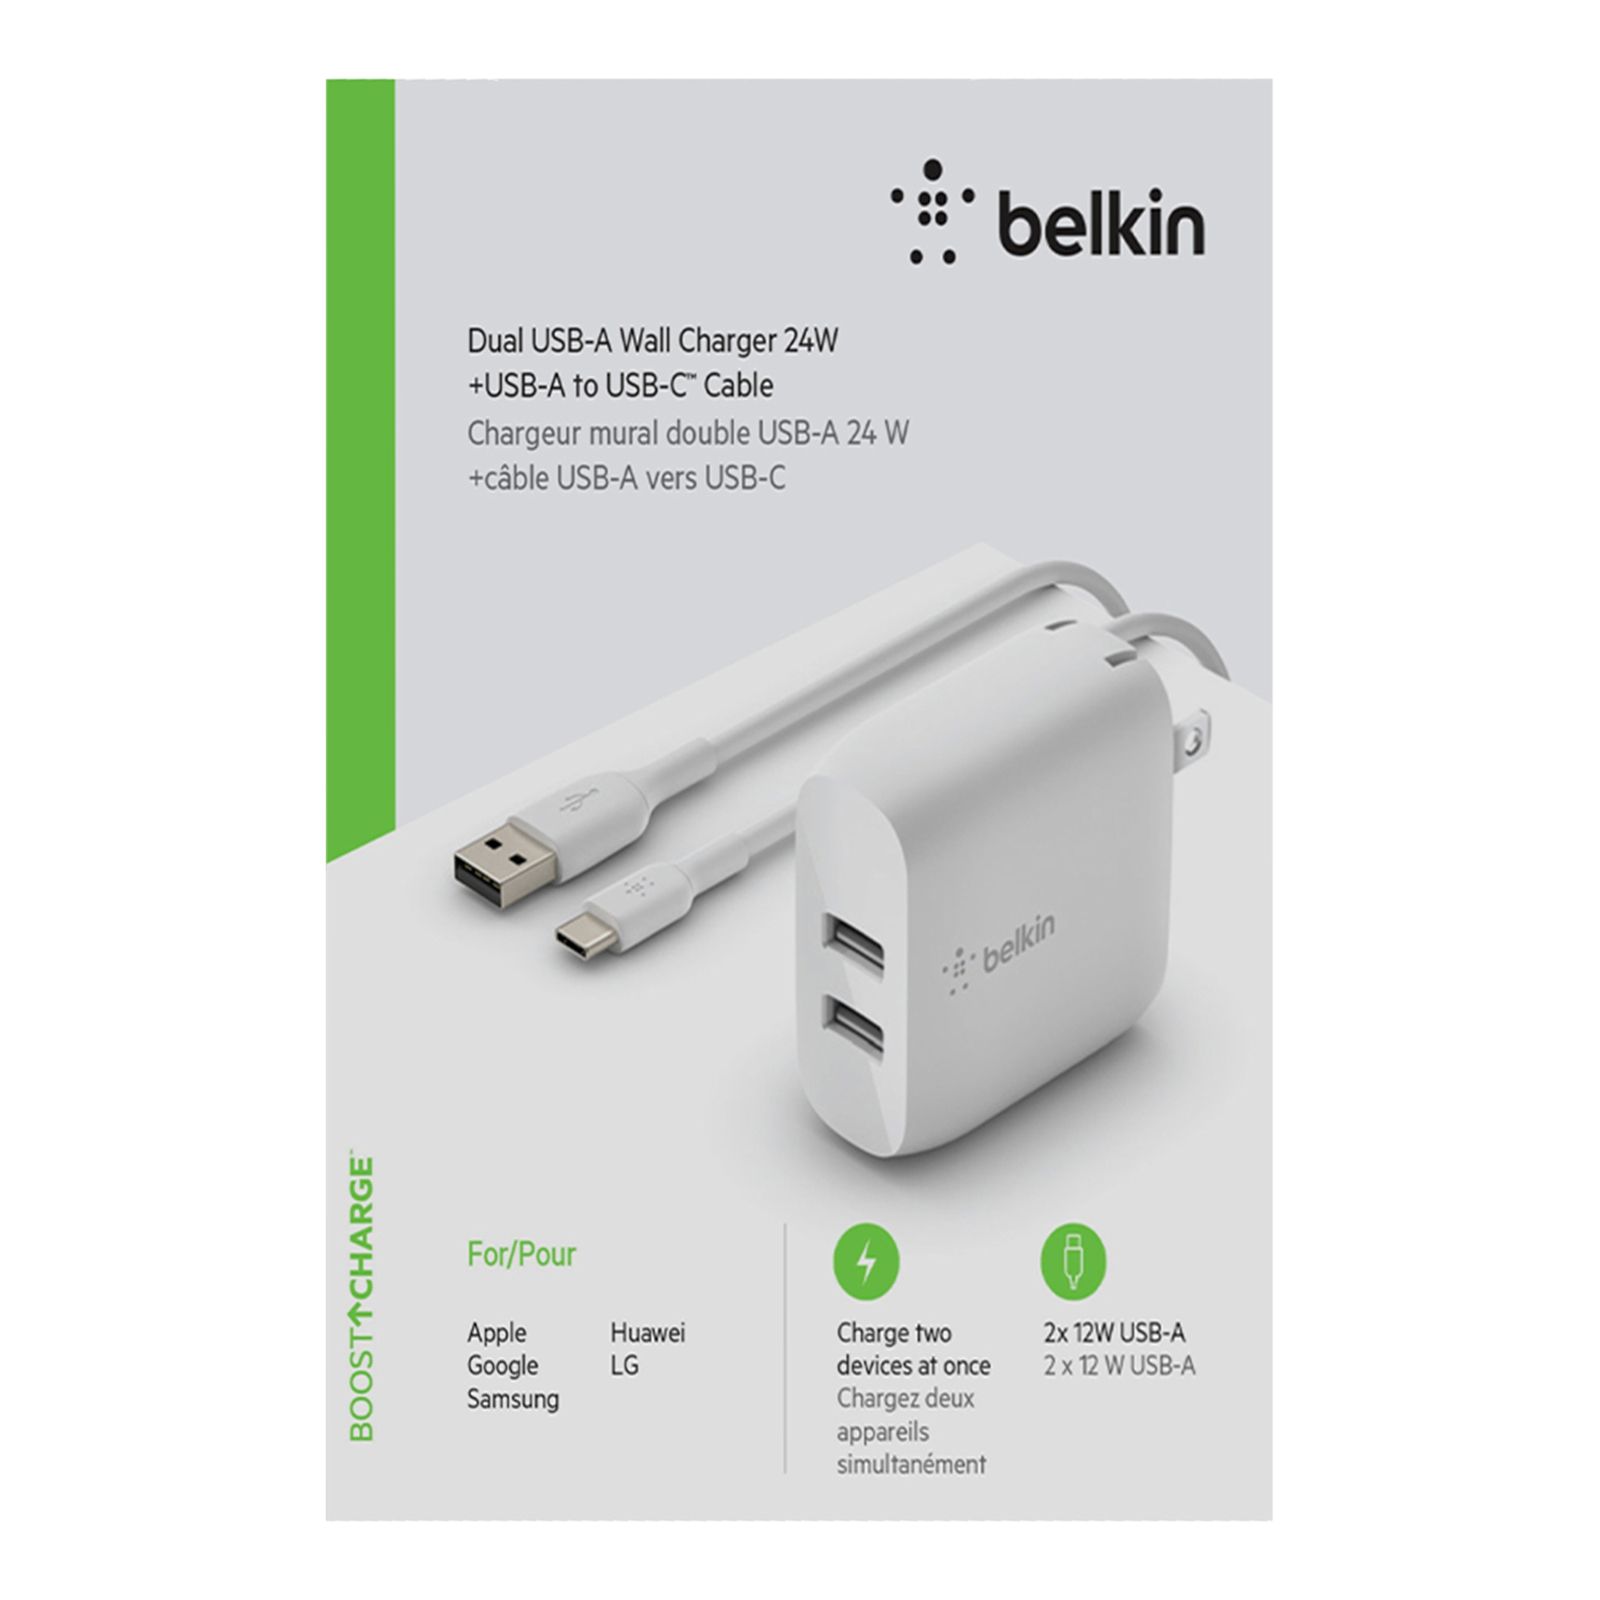 Chargeur Apple USB 12W - ISTORE